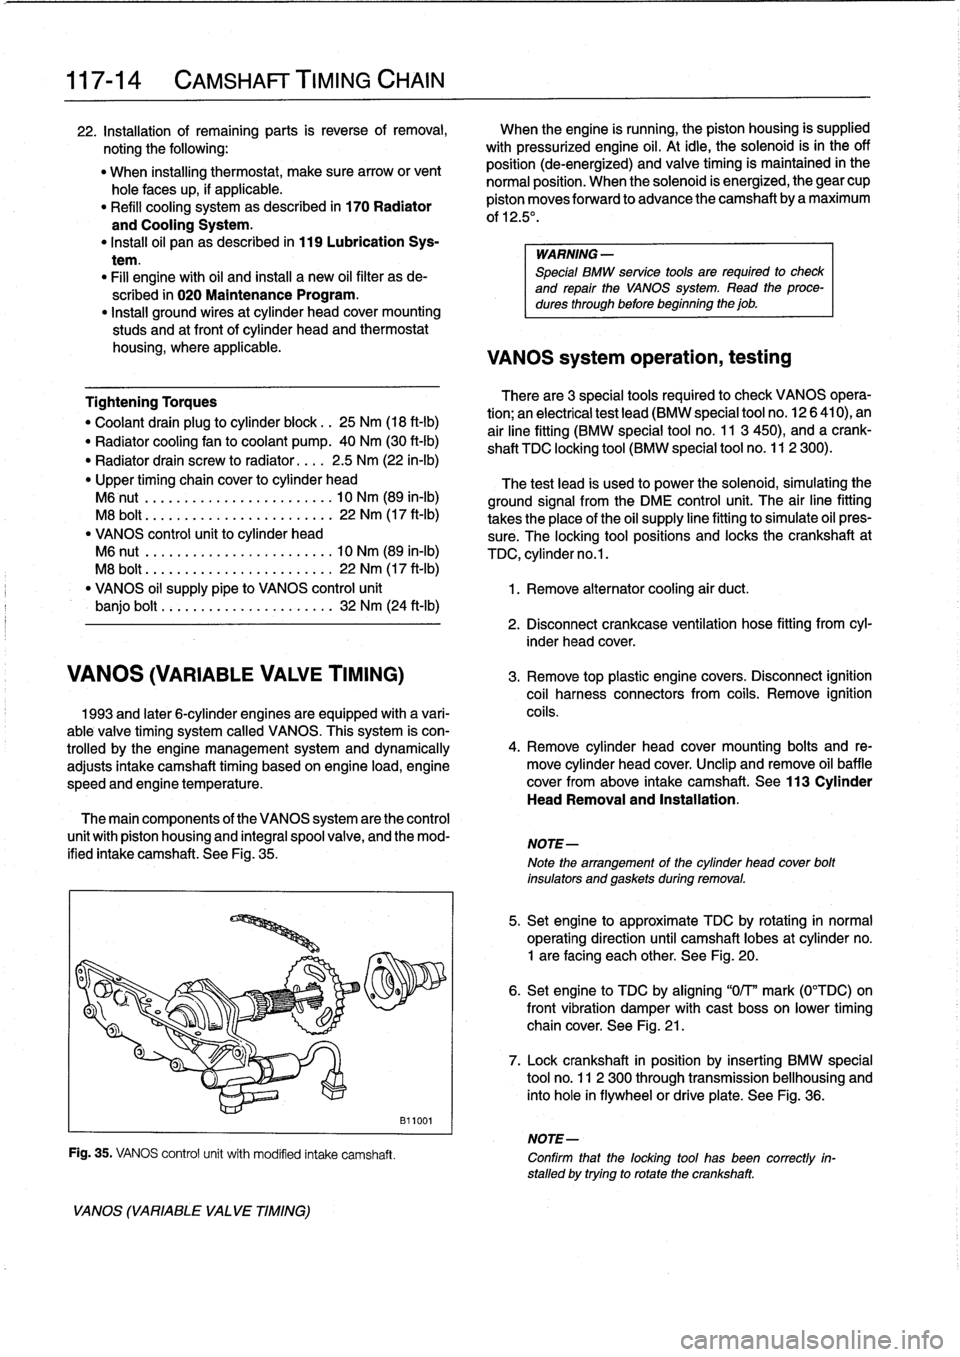 BMW 318i 1998 E36 Workshop Manual 
117-
1
4

	

CAMSHAFT
TIMING
CHAIN

22
.
Installation
of
remaining
parts
is
reverse
of
removal,

	

When
theengine
is
running,
the
piston
housing
is
supplied

noting
the
following
:

	

with
pressuri